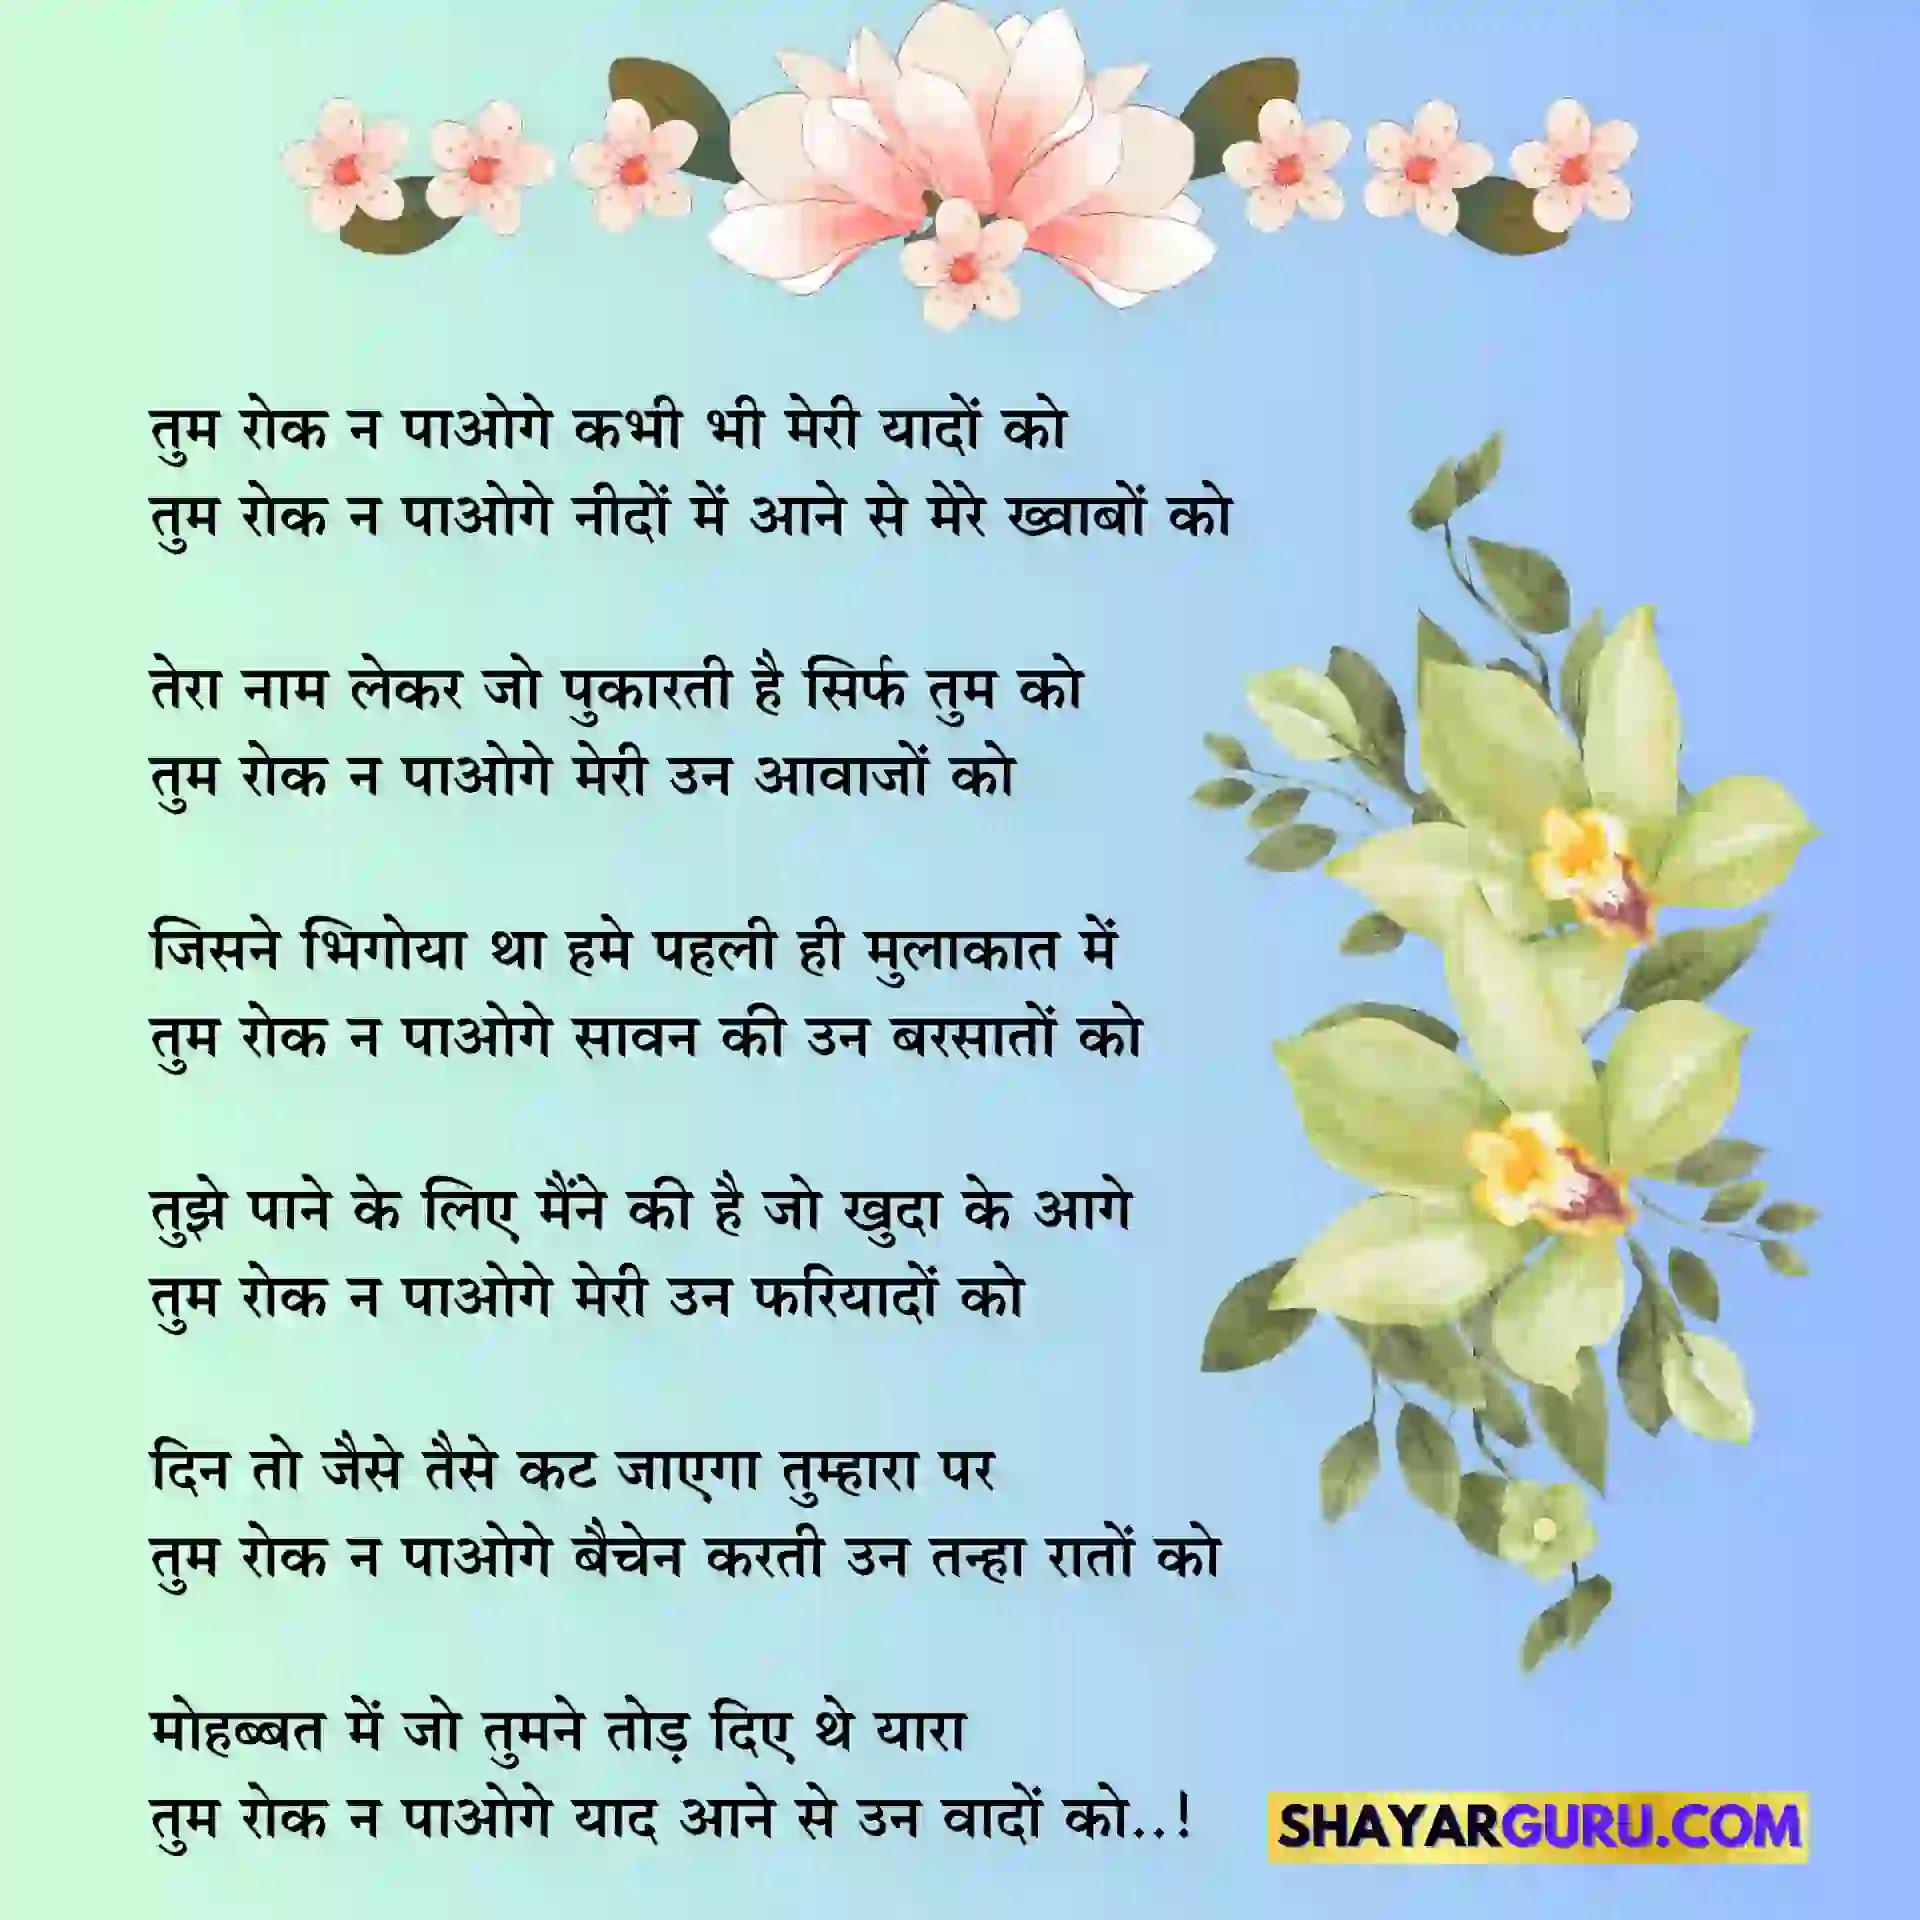 Poems About life in Hindi